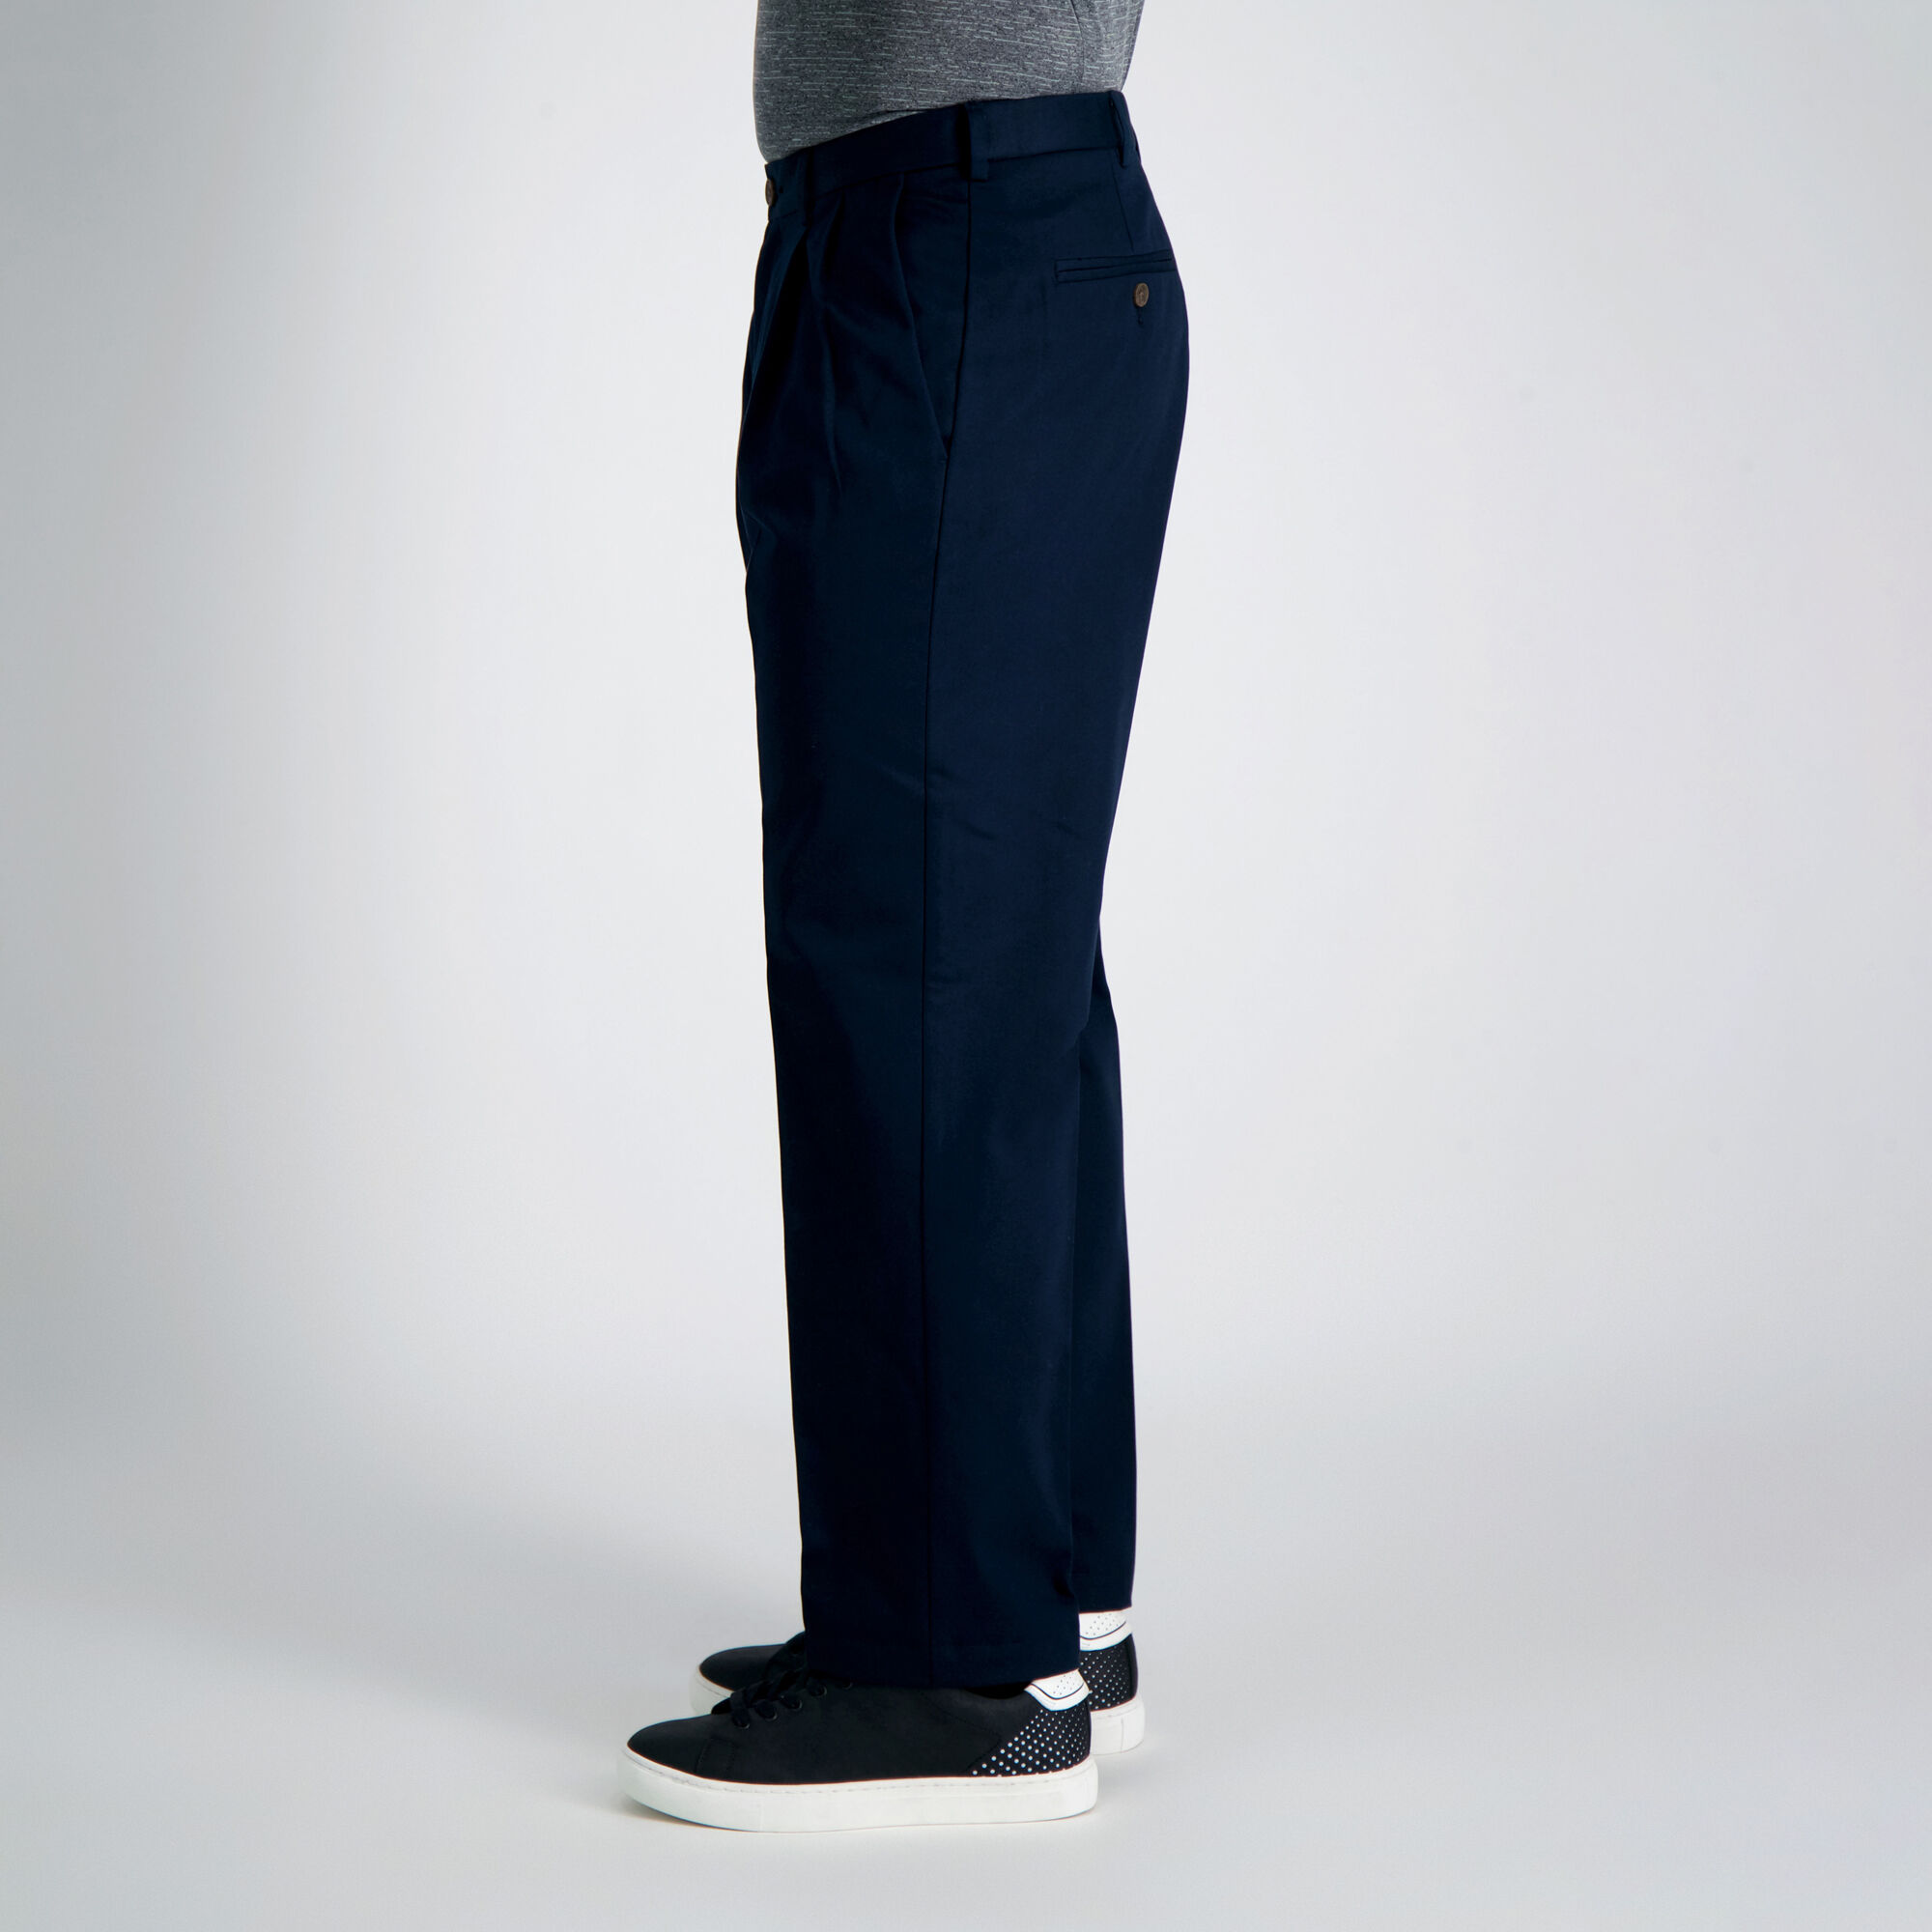 Classic Fit Pant Styles | Haggar